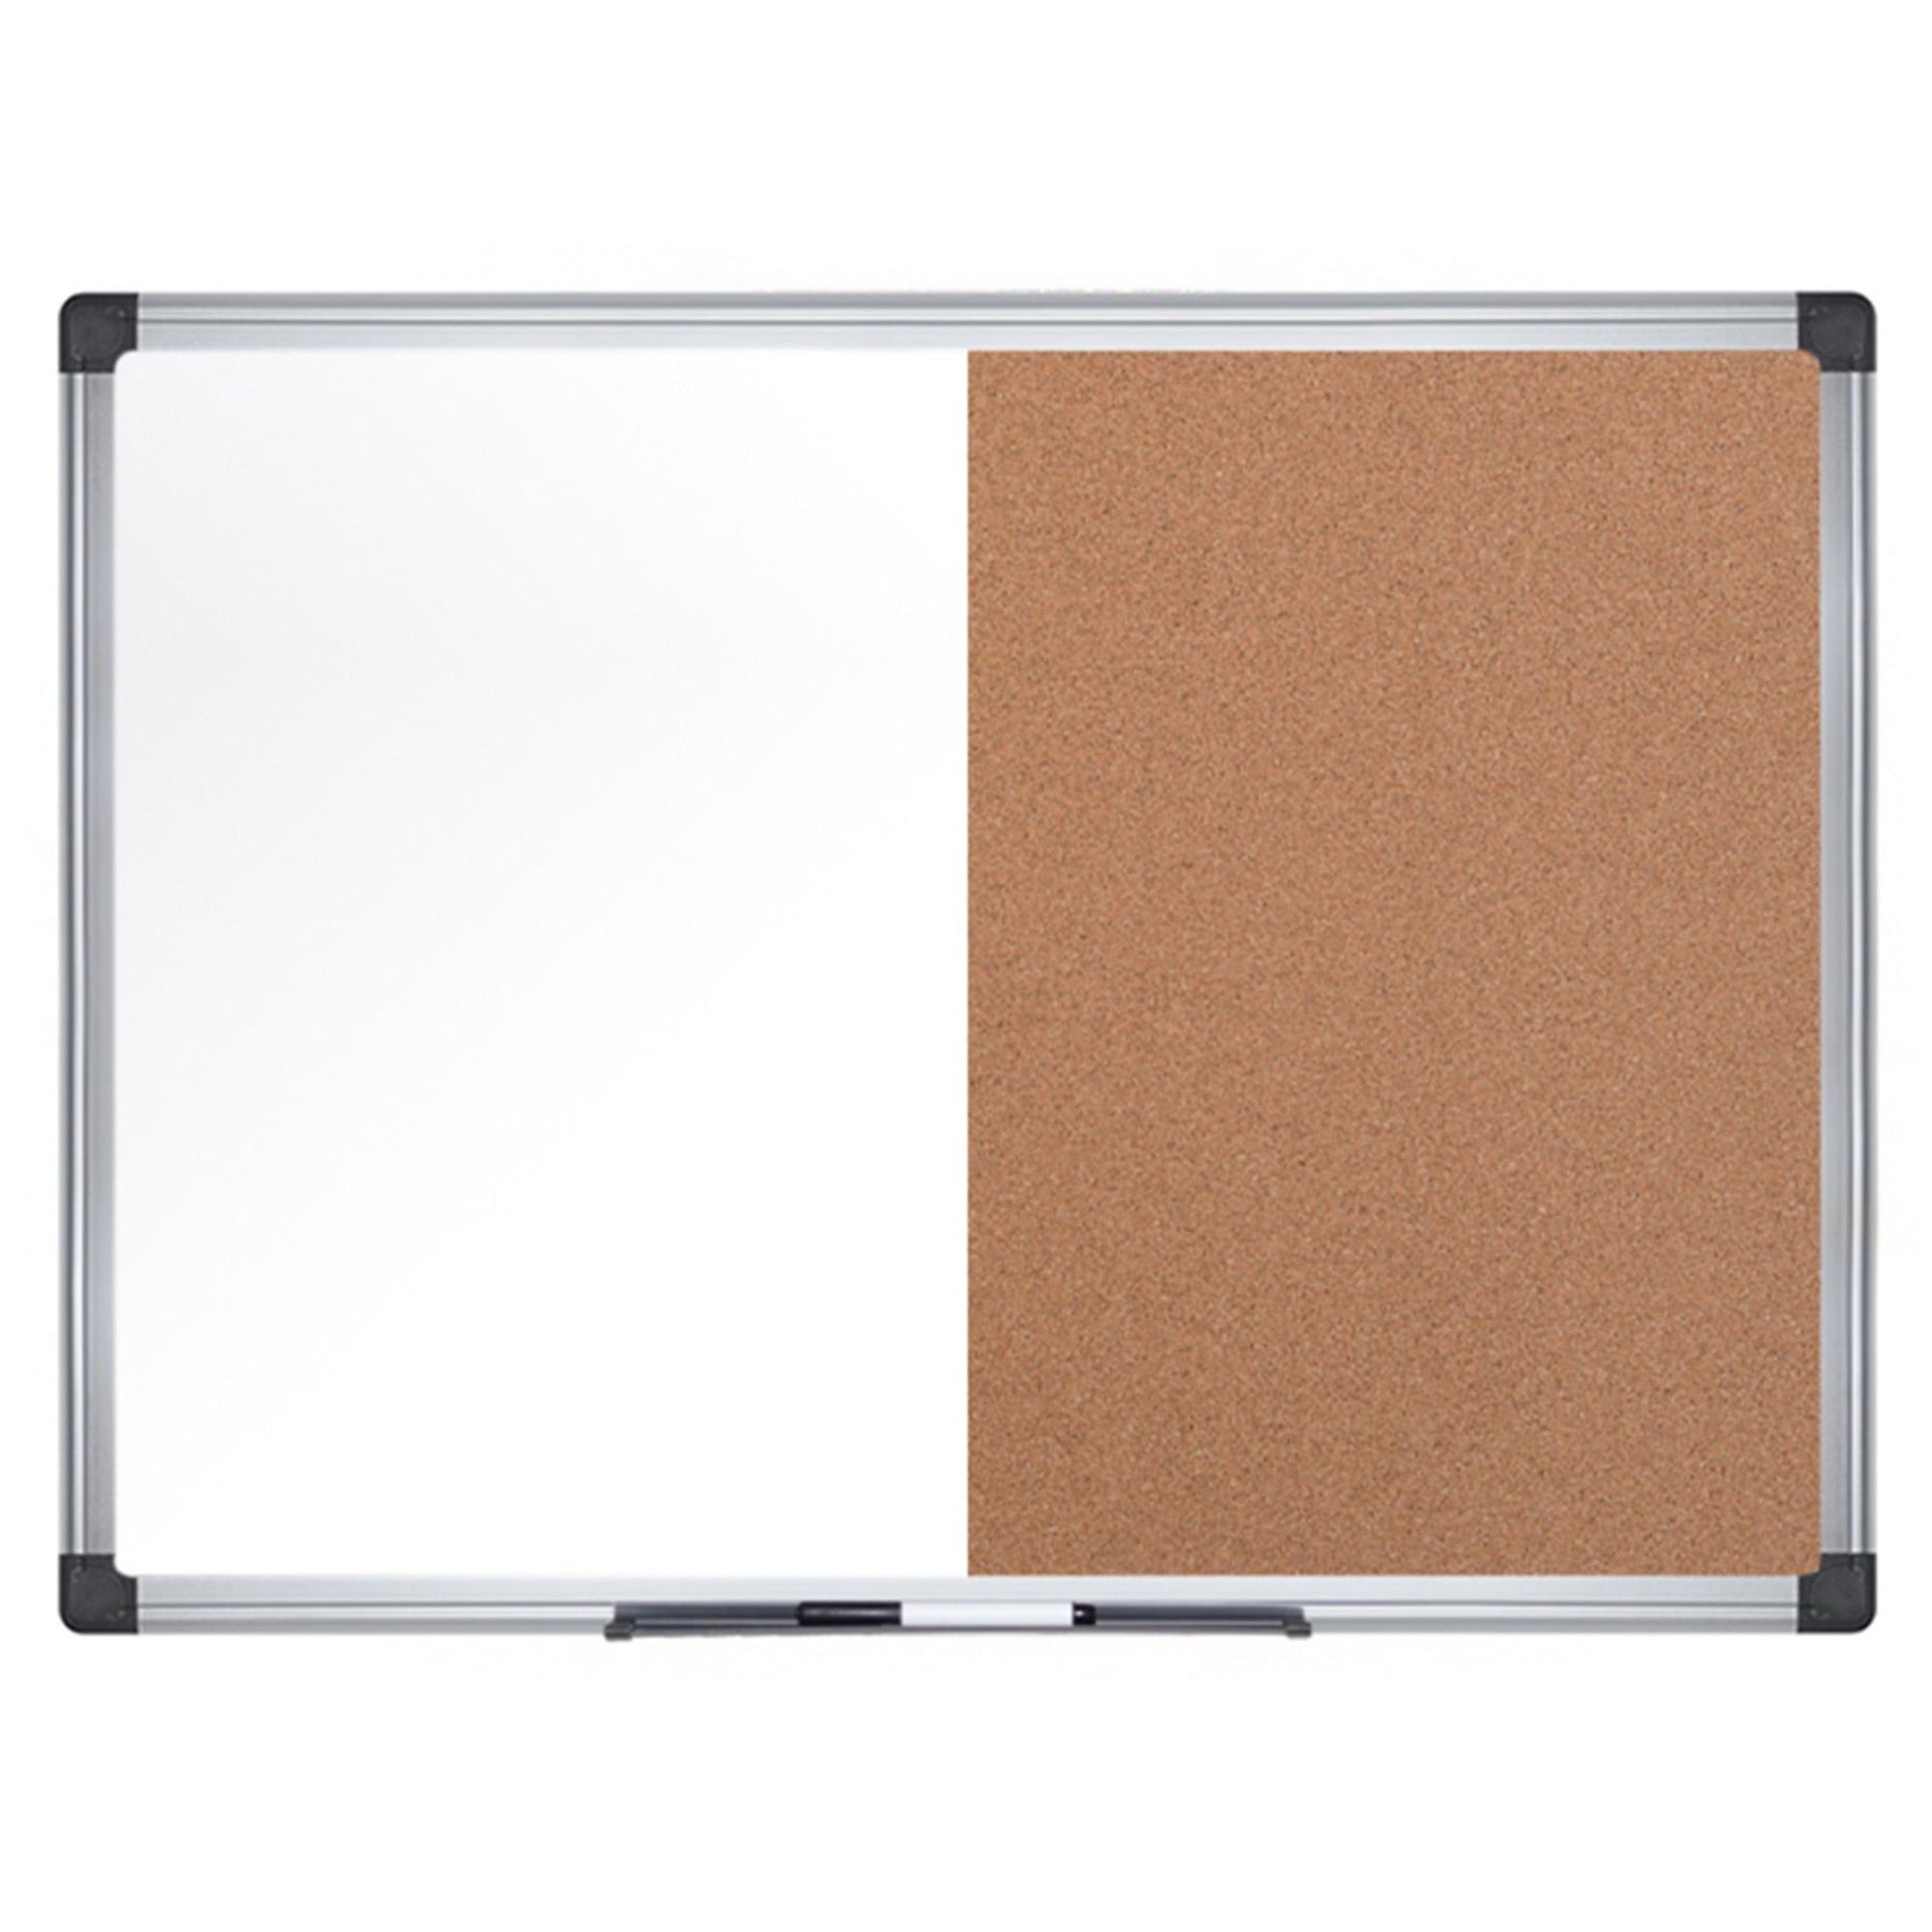 mastervision-dry-erase-combo-board-050-height-x-48-width-x-72-depth-natural-cork-melamine-surface-self-healing-resilient-easy-to-clean-dry-erase-surface-durable-silver-aluminum-frame-1-each-taa-compliant_bvcxa2702170 - 1